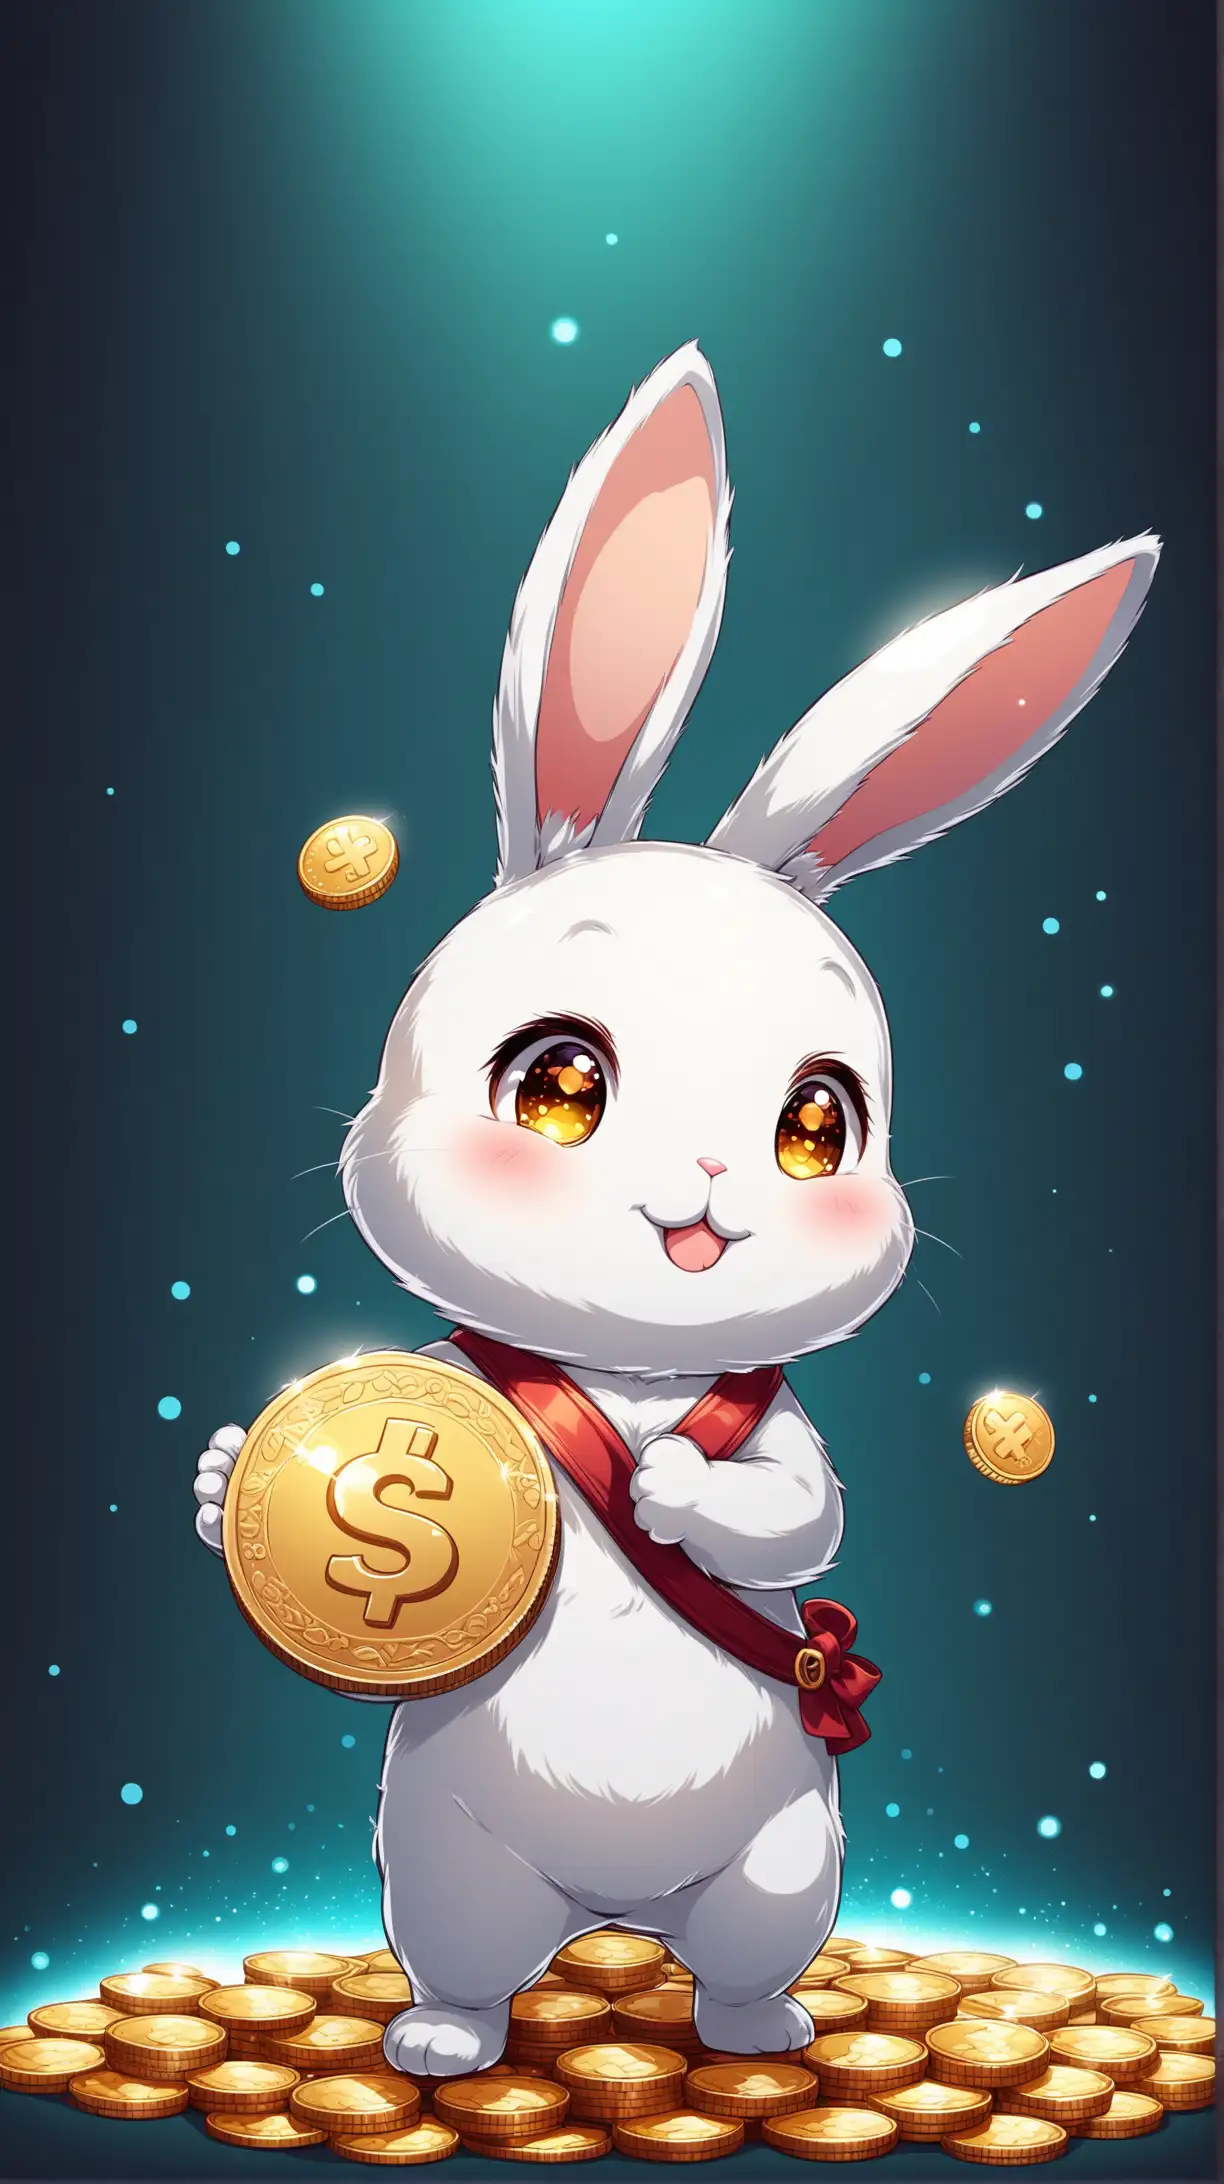 Silver CoinCarrying Rabbit Cartoon in Mysterious Setting